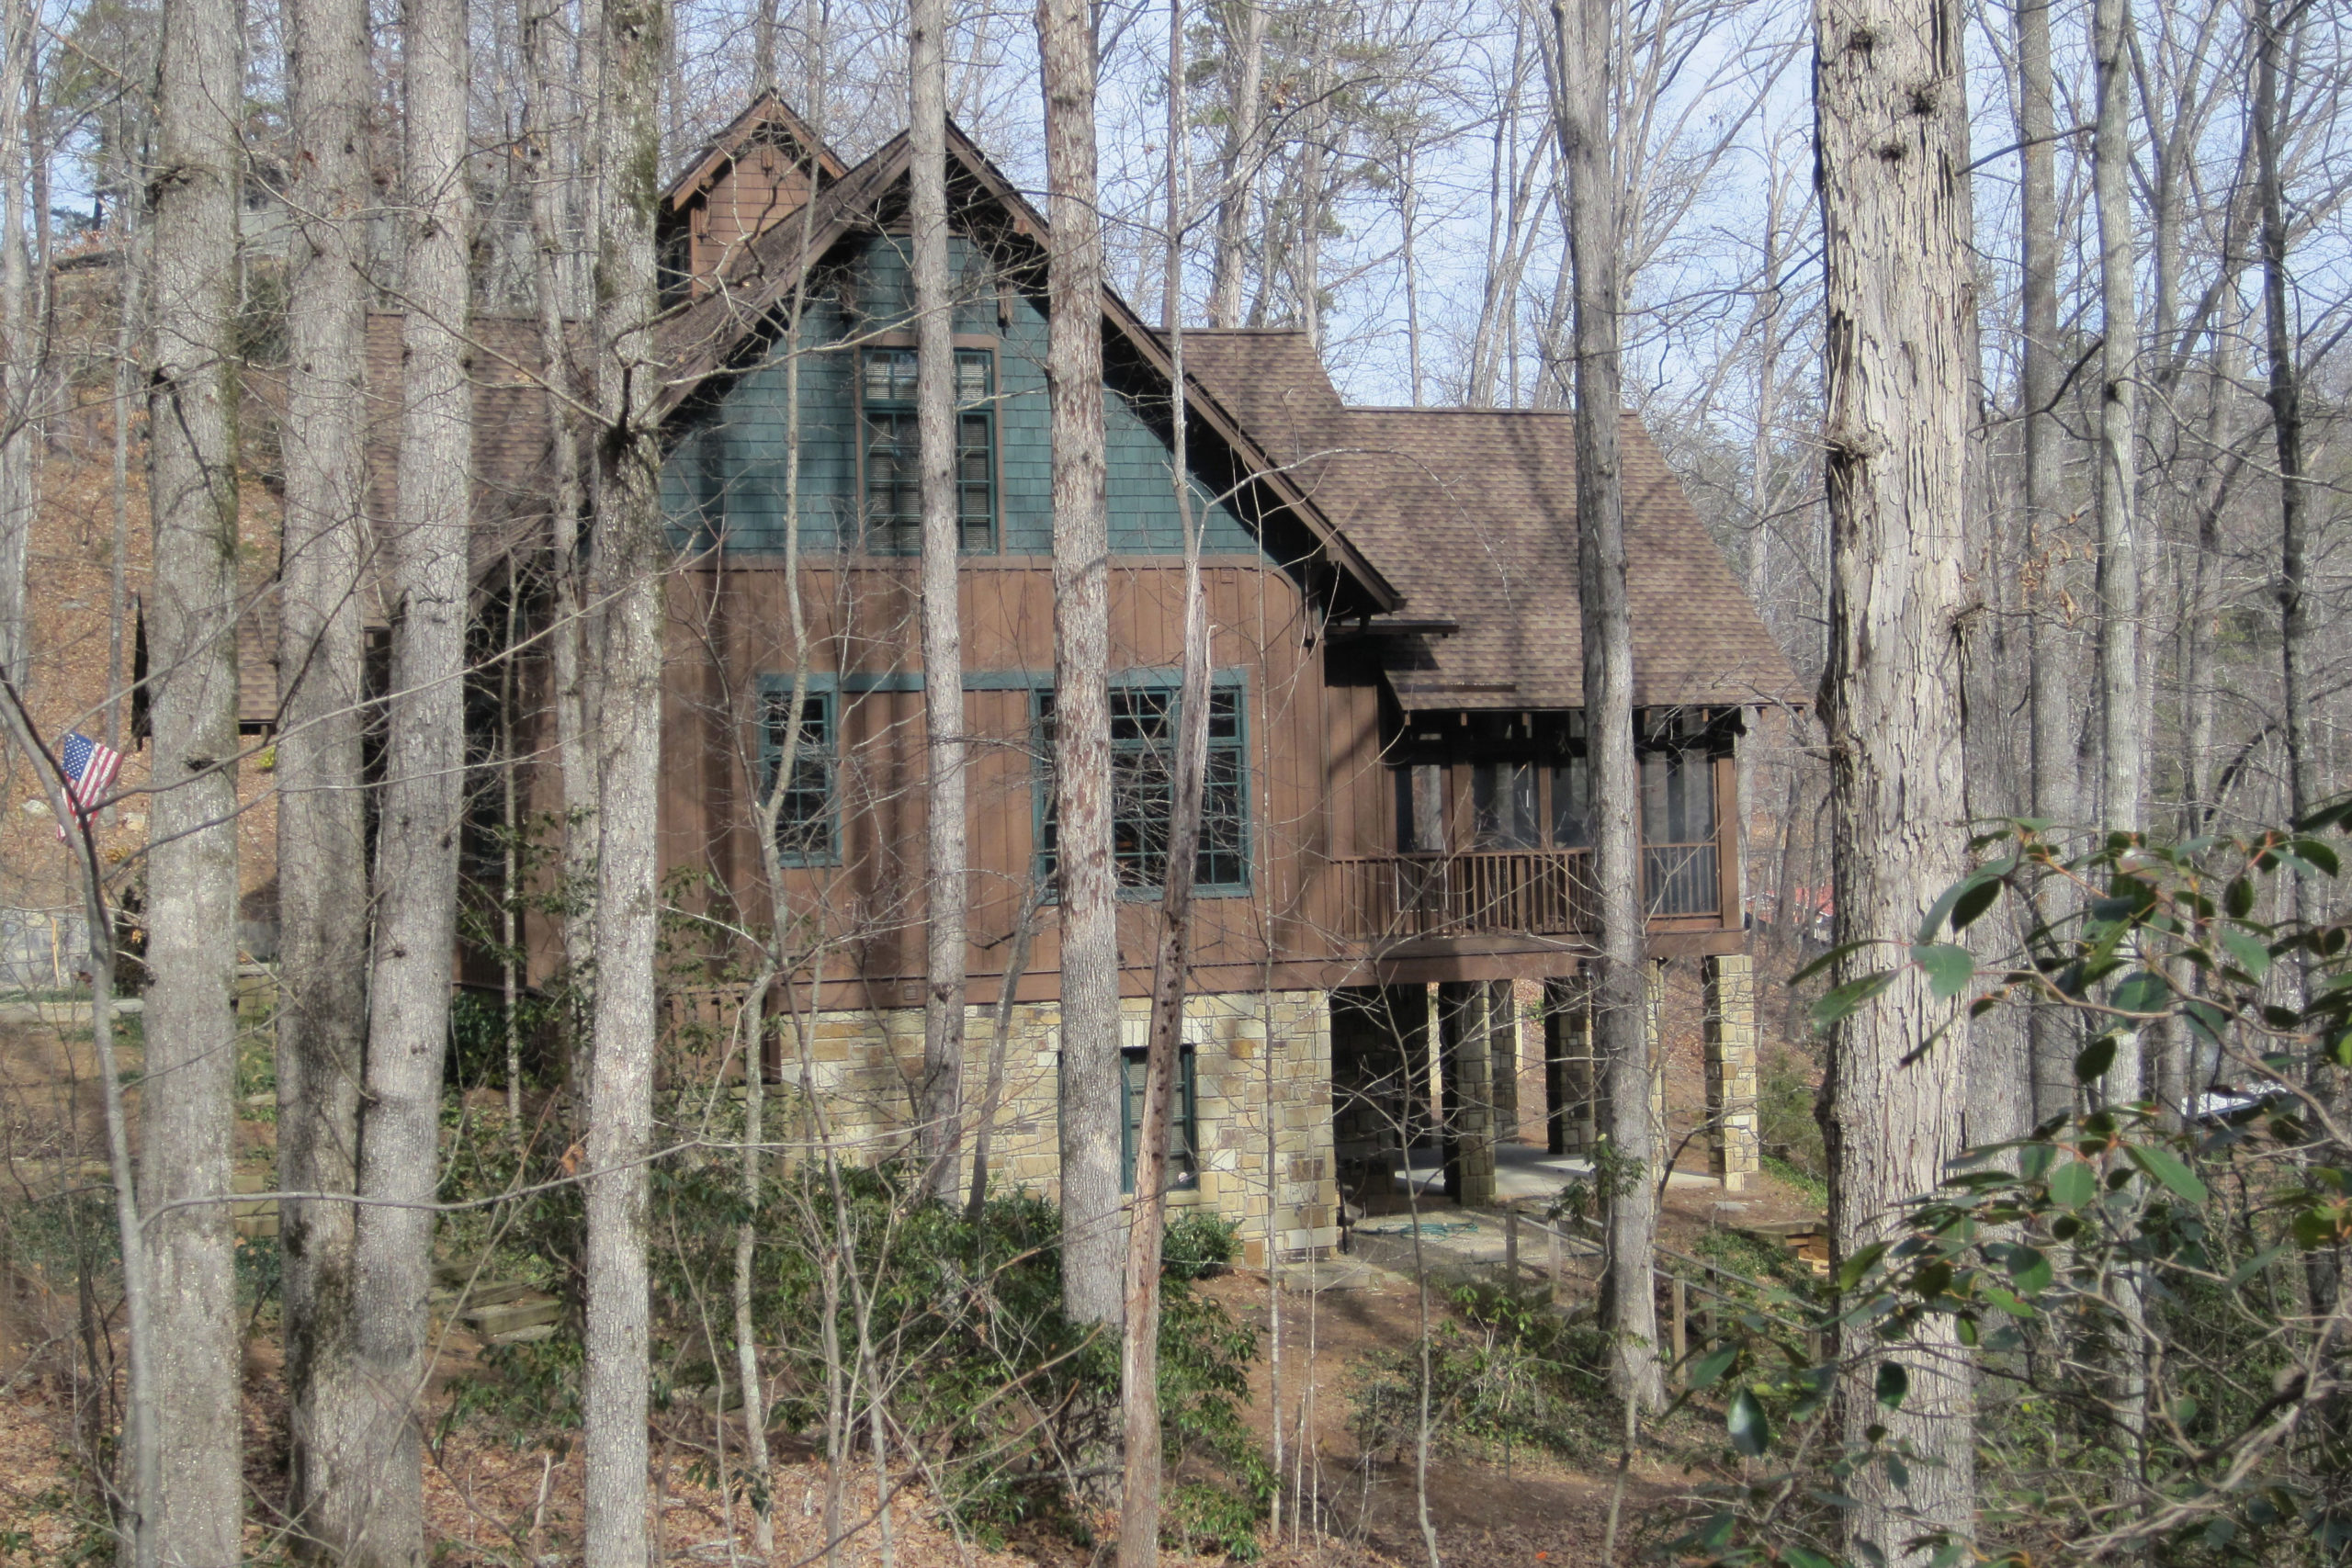 A side view of this private residence illustrating a screen porch facing Lake Lanier.